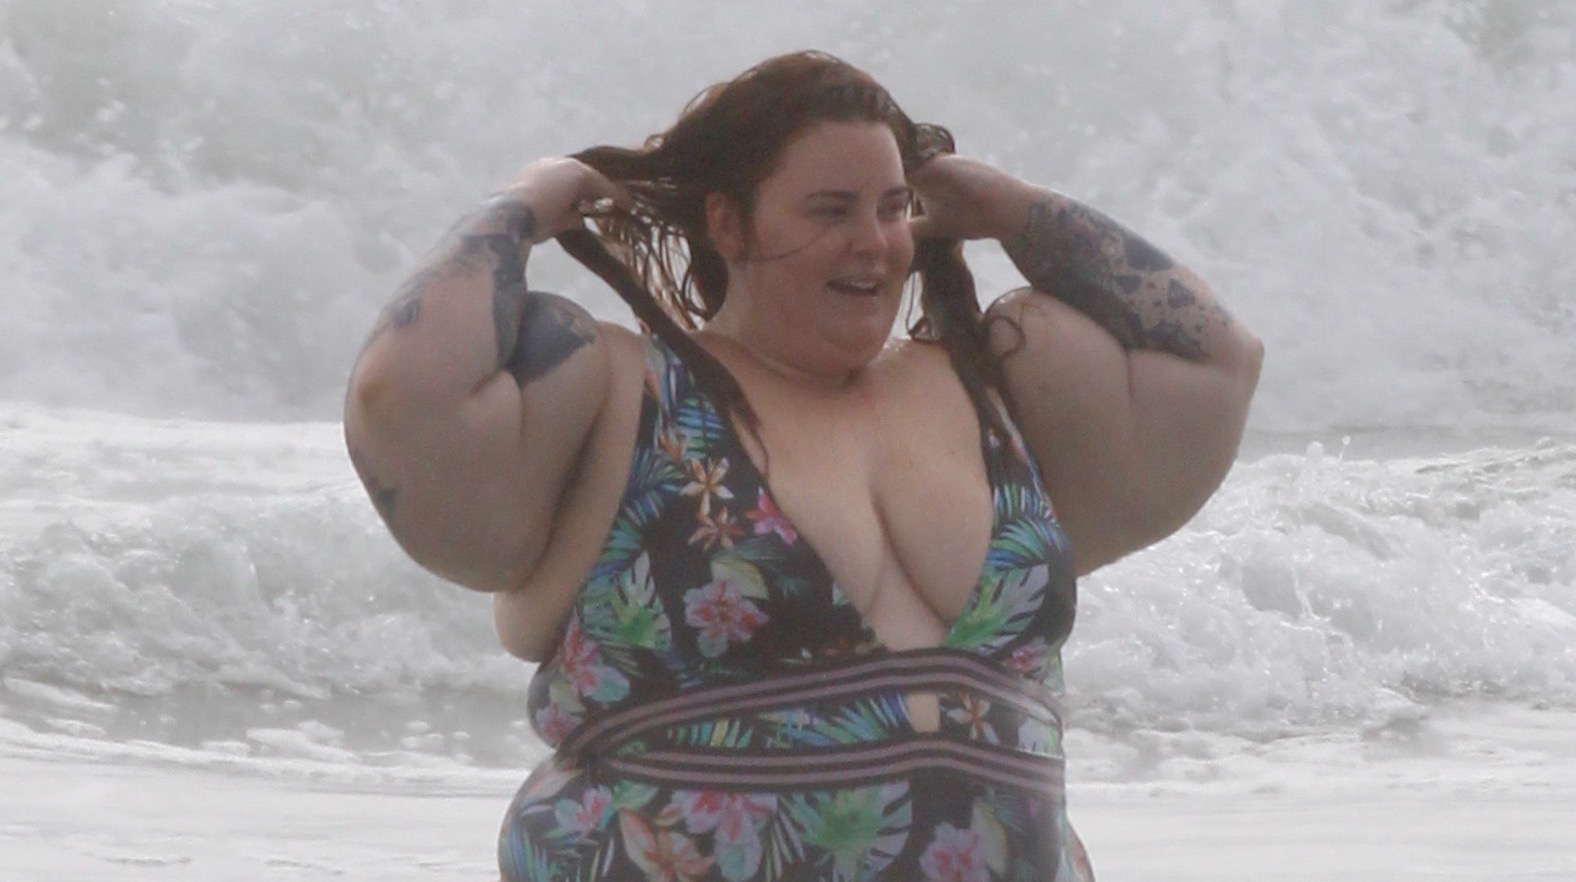 Tess Holliday Xxxvideo - Tess Holliday Rocks Swimsuit: Photos of the Models Floral 1-Piece